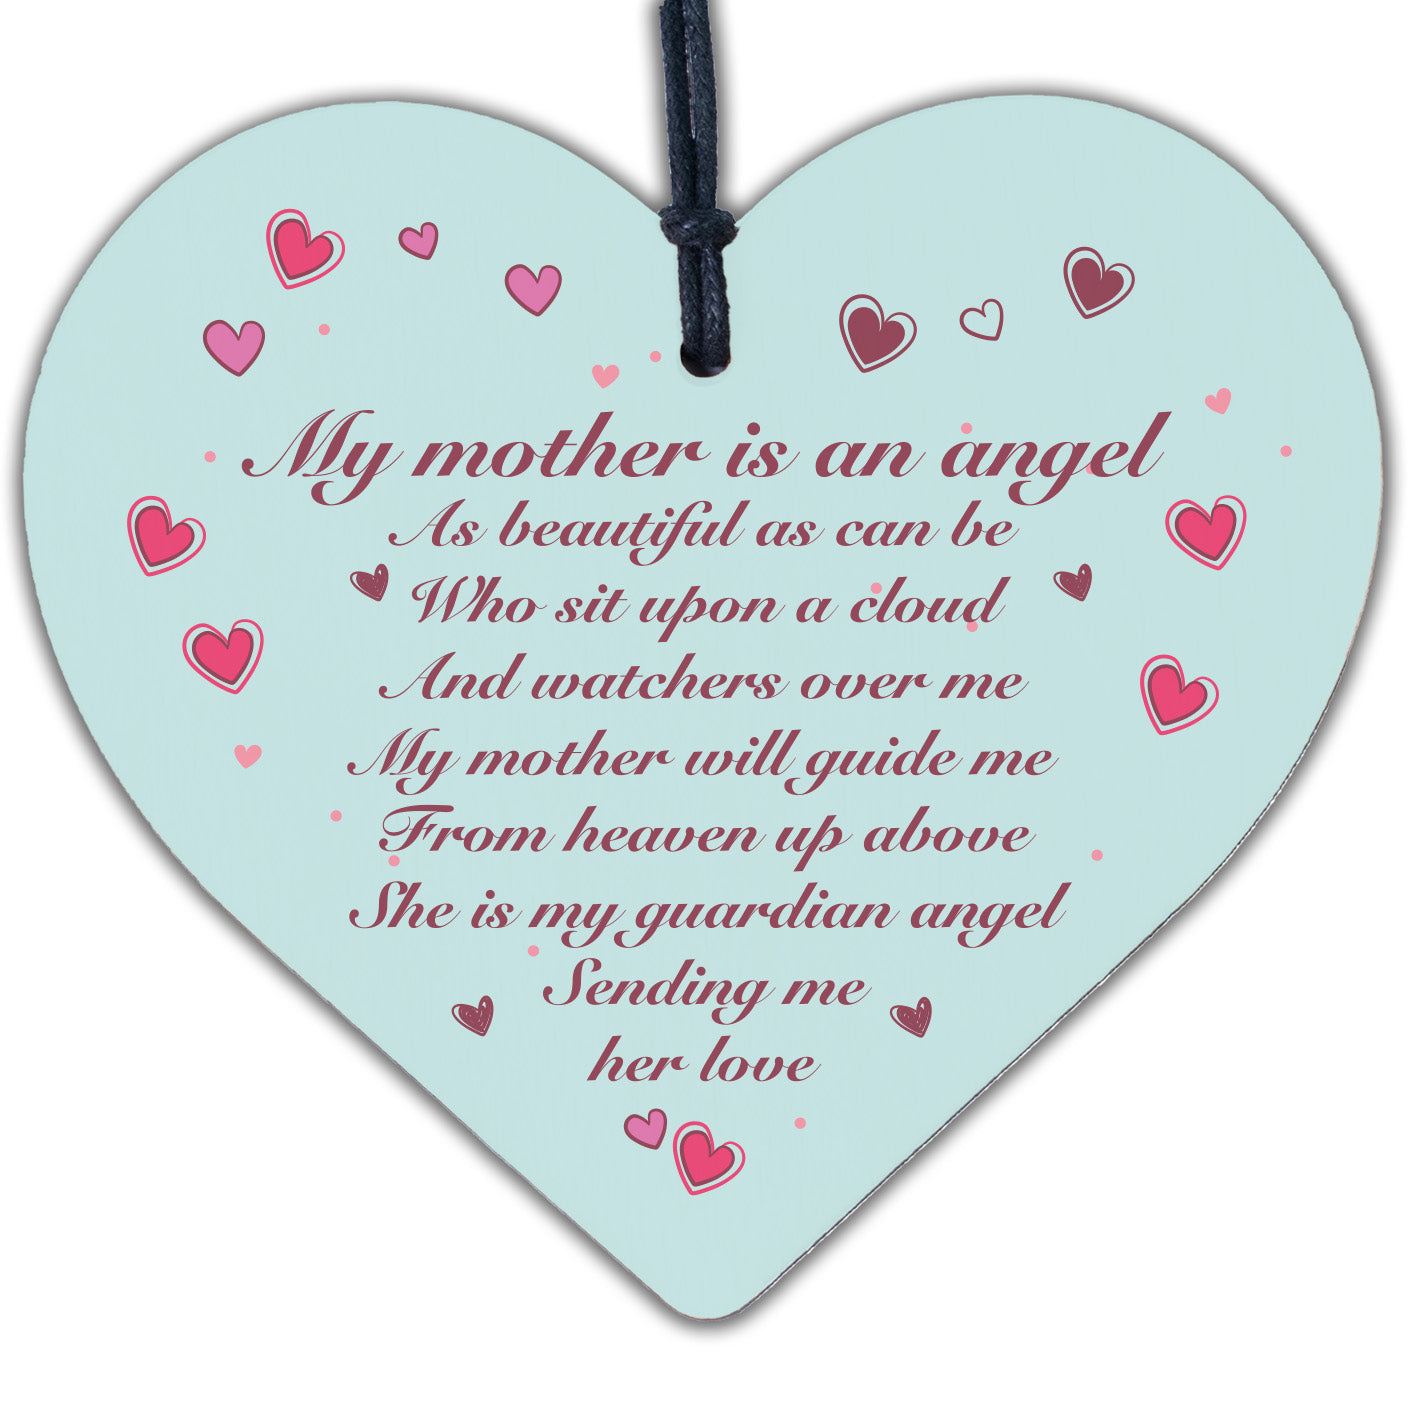 Mum Guardian Angel Wood Love Heart Sign Memorial Mothers Day Gift Grave Plaque